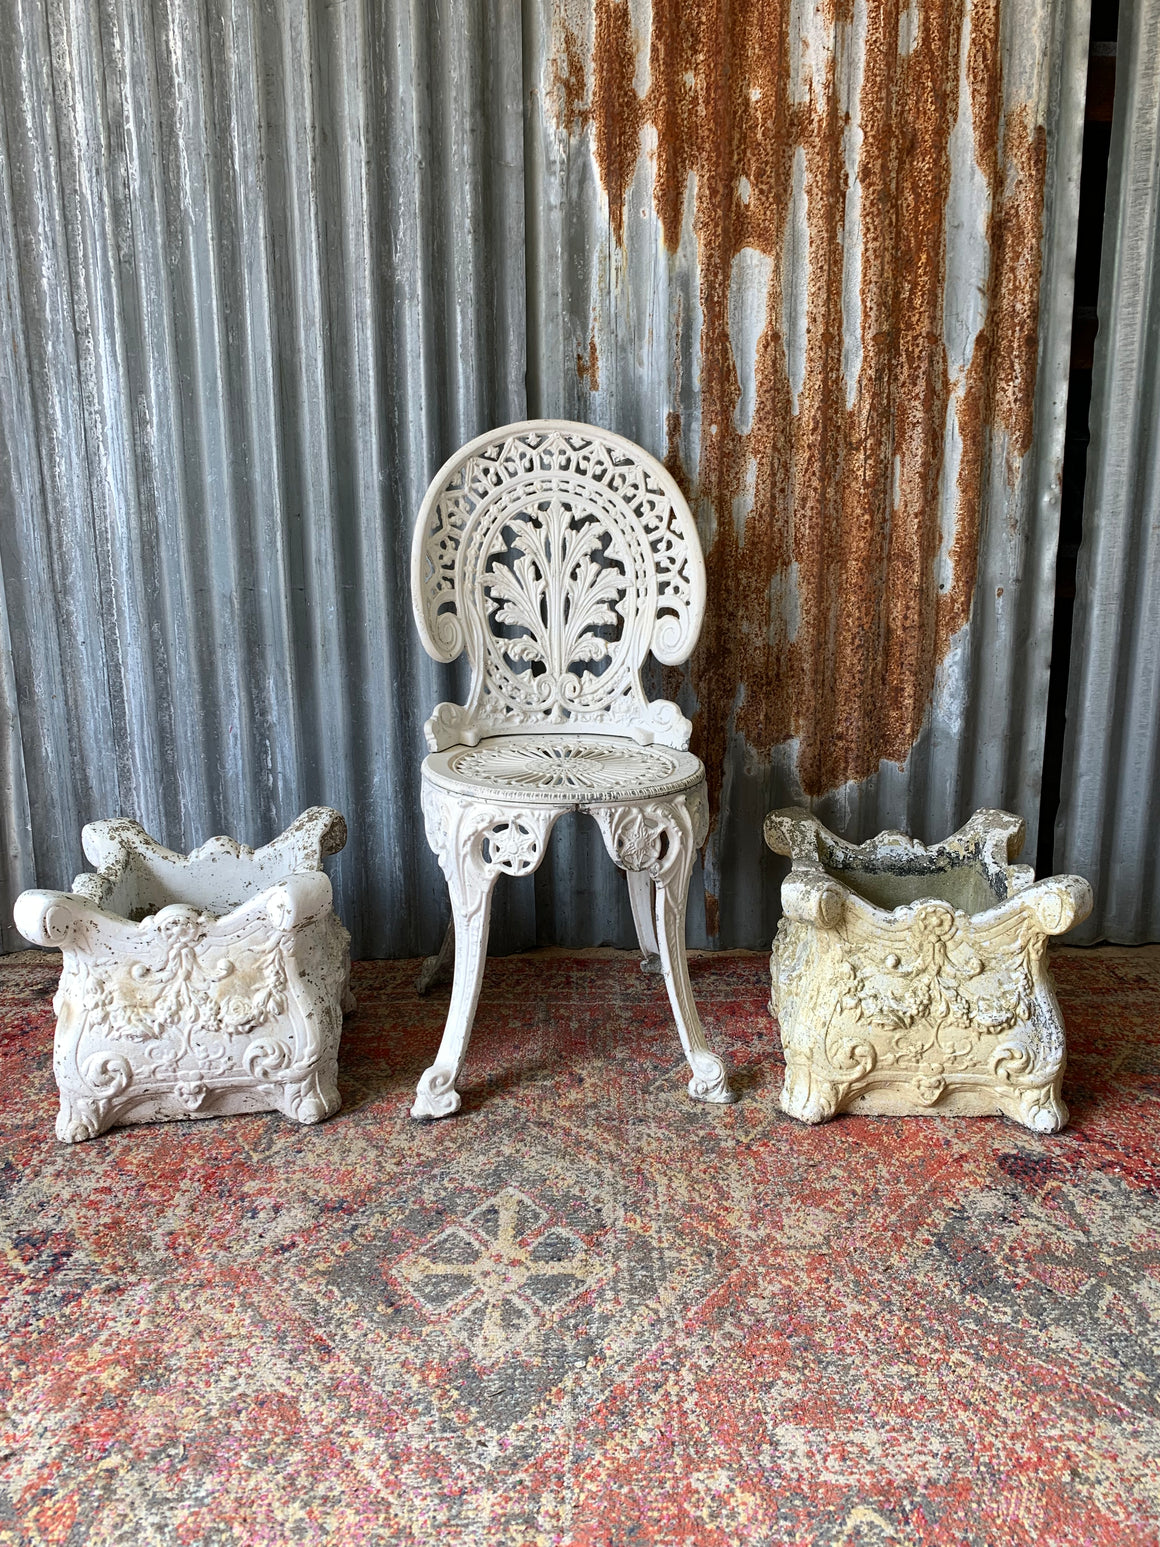 A pair of white French style cast stone planters